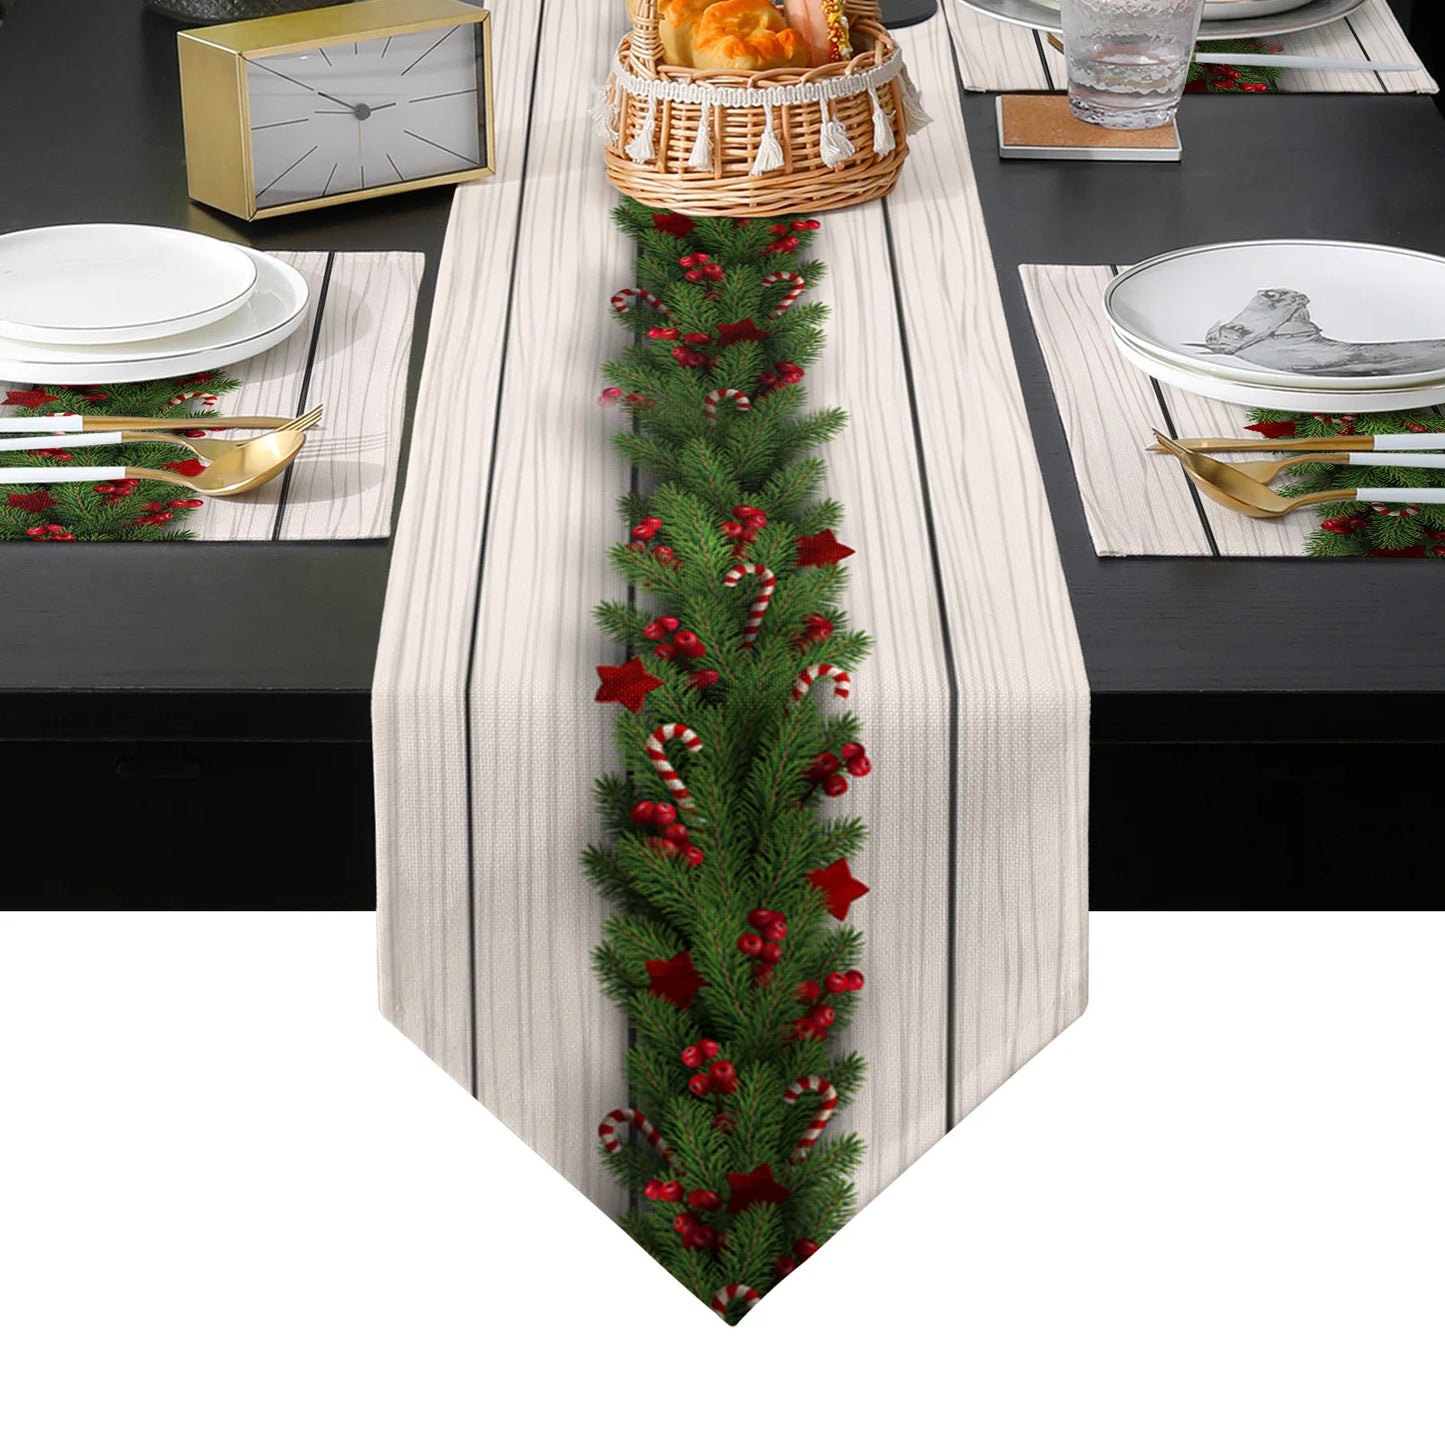 Christmas Pine Needle Candy Table Runner and Placemat Set - Vintage Wood Grain Design - Home Decor Accessories